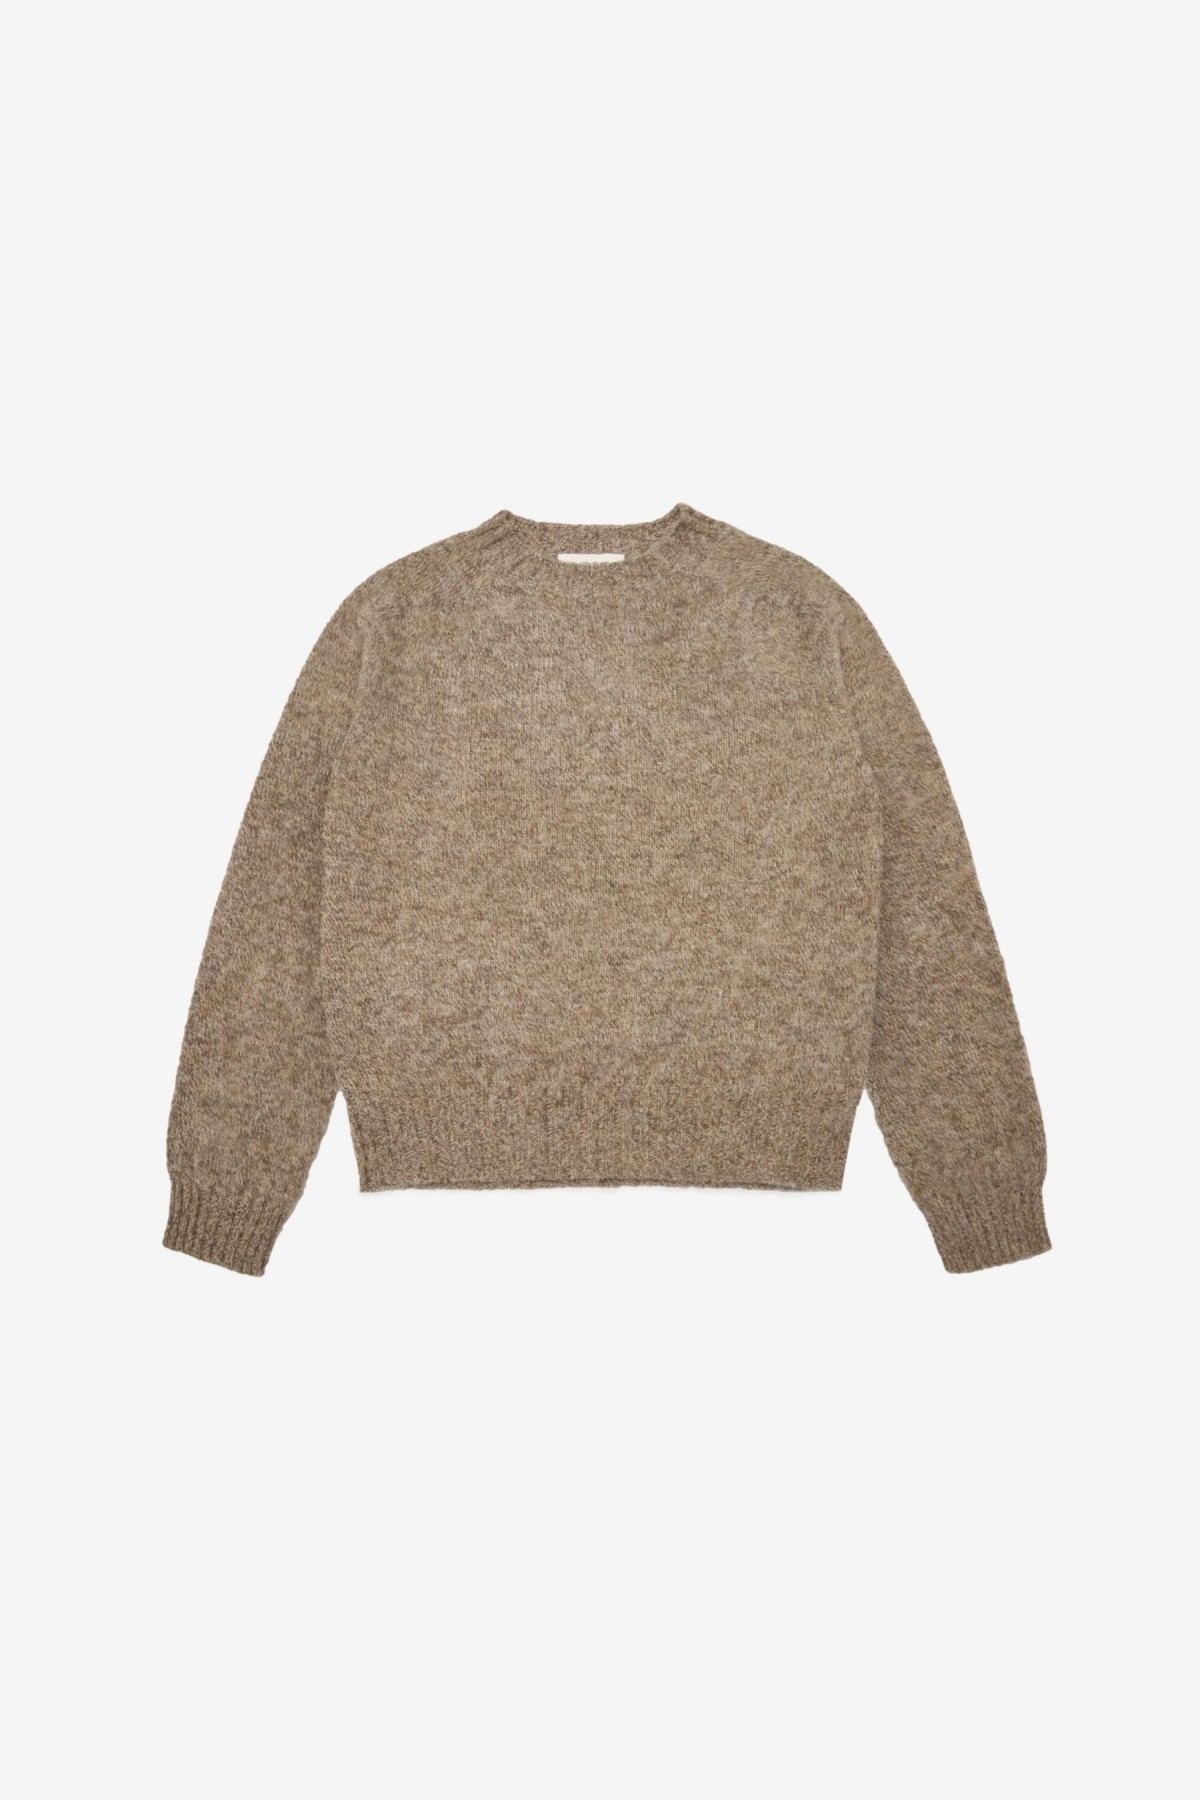 YMC You Must Create Jets Crew Neck Knit in Natural